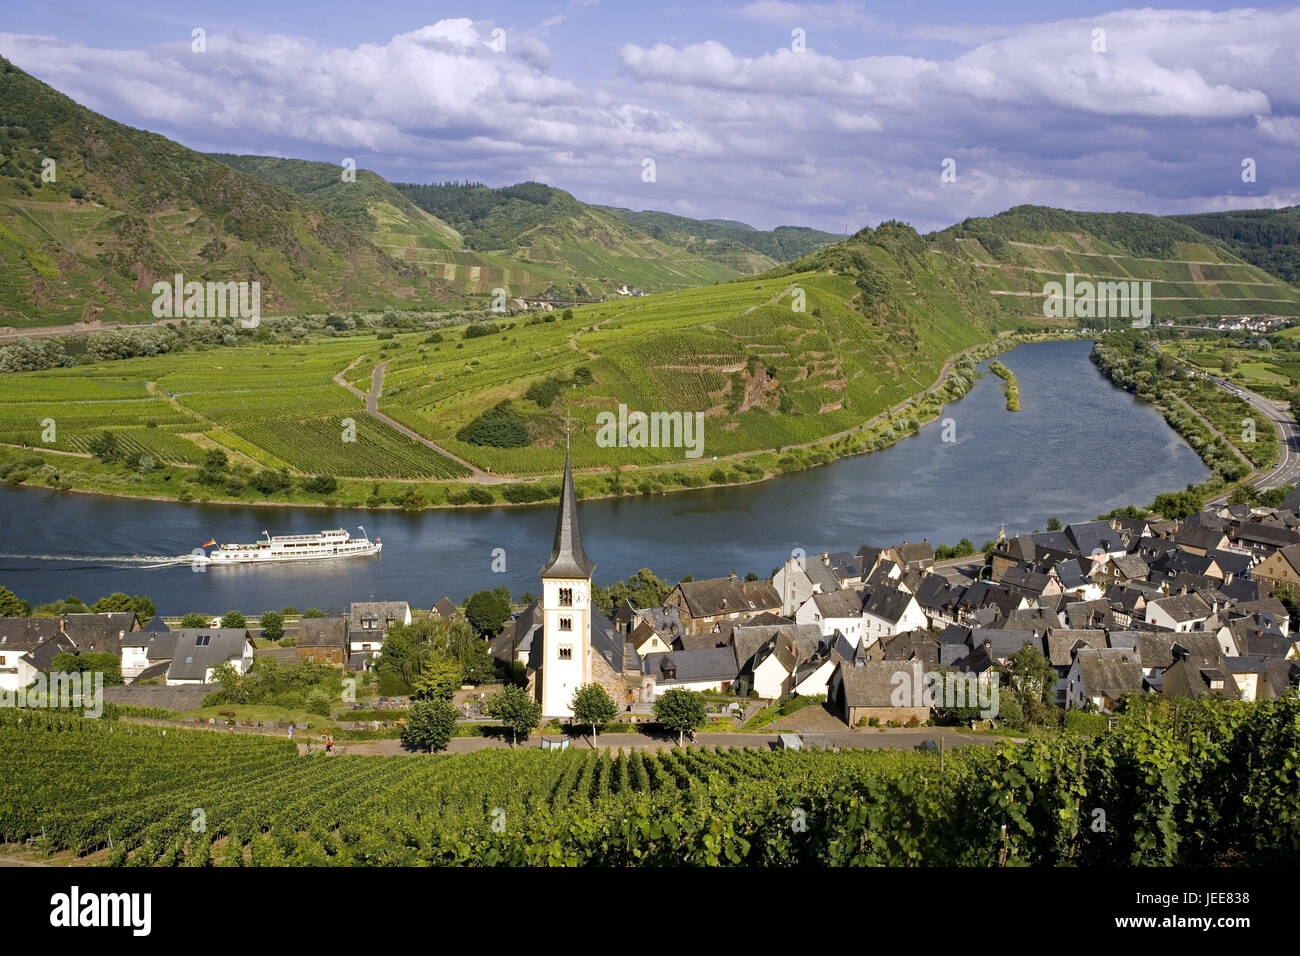 Germany, Rhineland-Palatinate, Bremm, local overview, church, the Moselle, holiday ship, Moselle valley, Moselle loop, place, houses, residential houses, parish church, flux loop, river, ship, riverboat journey, wine region, viticulture, wine-growing area, vineyards, destination, tourism, Stock Photo